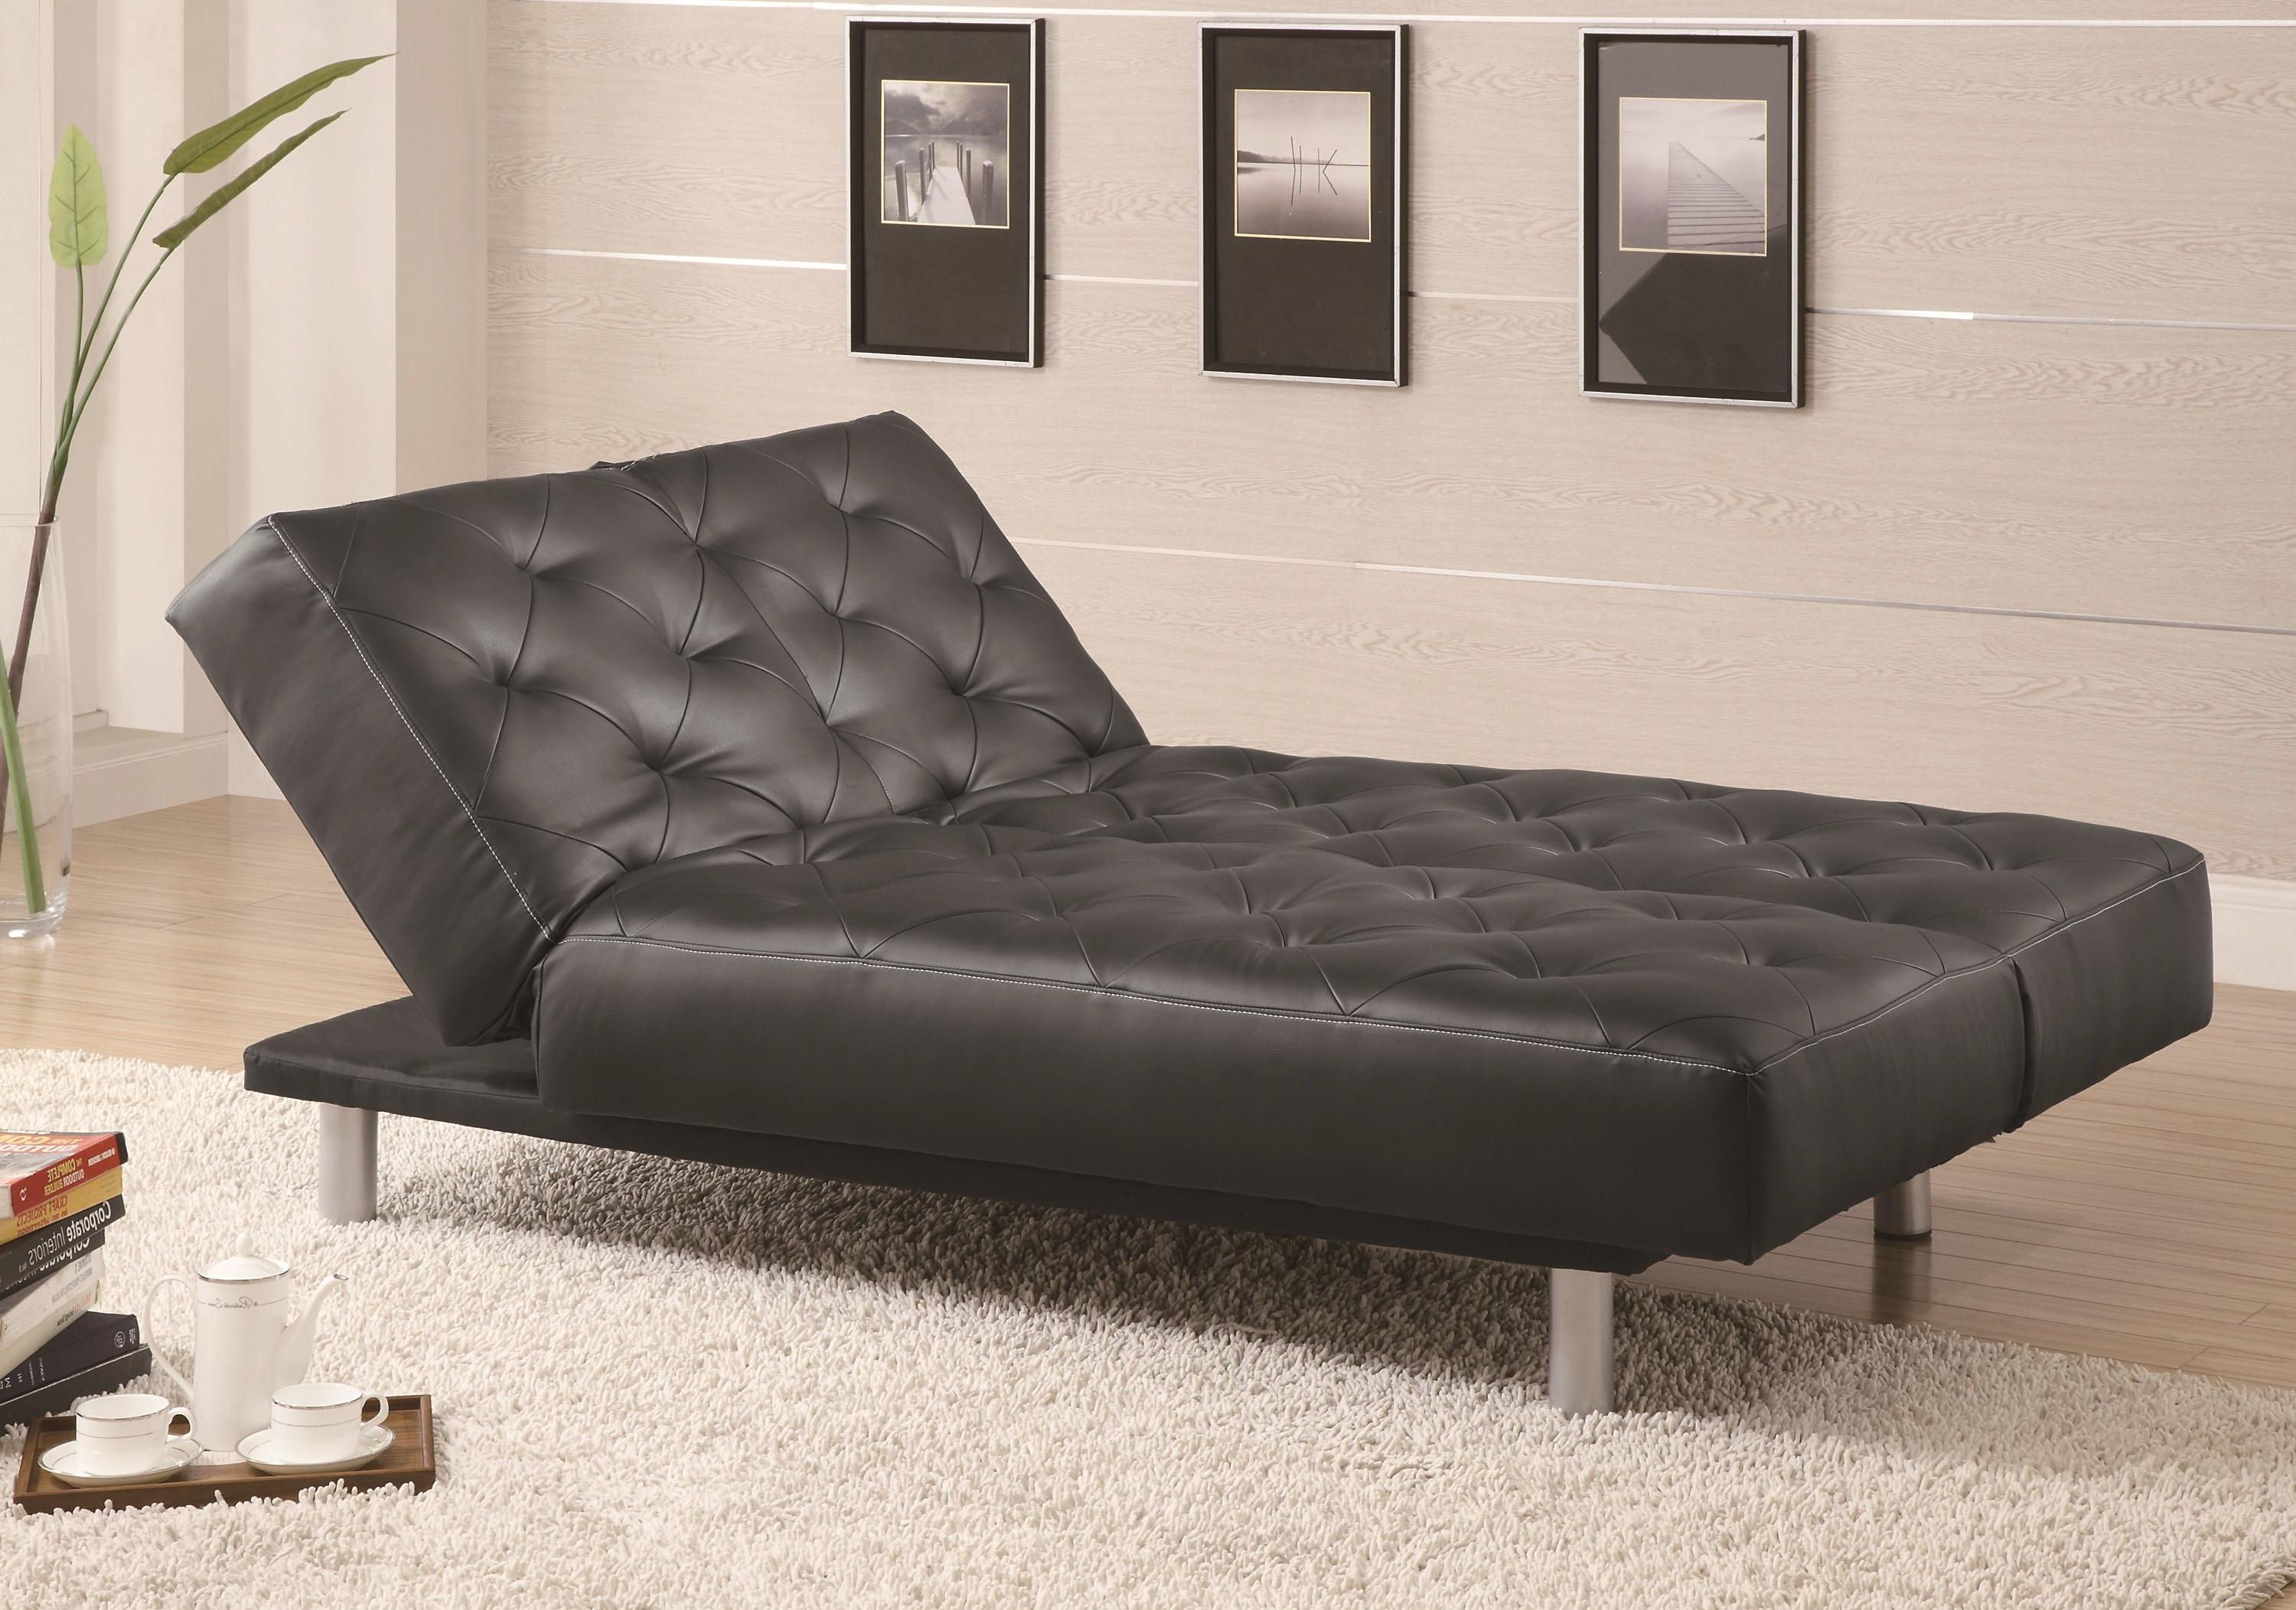 Coaster Sofa Beds And Futons Black Vinyl Tufted Sofa Bed/oversize Within Well Liked Convertible Chaise Lounges (View 11 of 15)